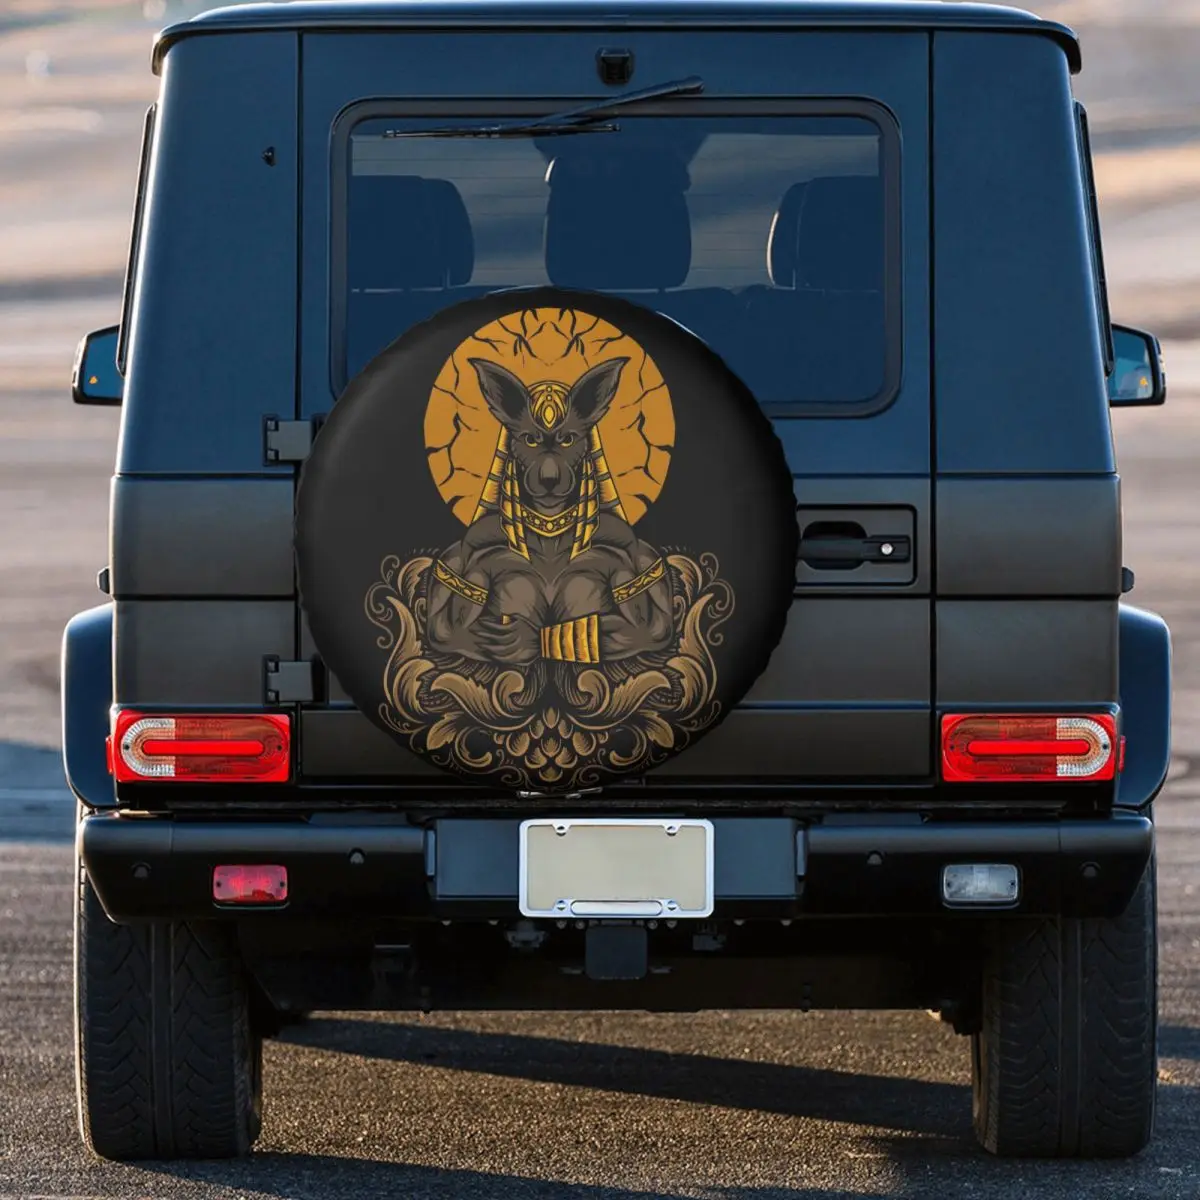 

Anubis God Tire Cover Wheel Protectors Weatherproof Universal for Jeep Trailer RV SUV Truck Camper Travel Trailer